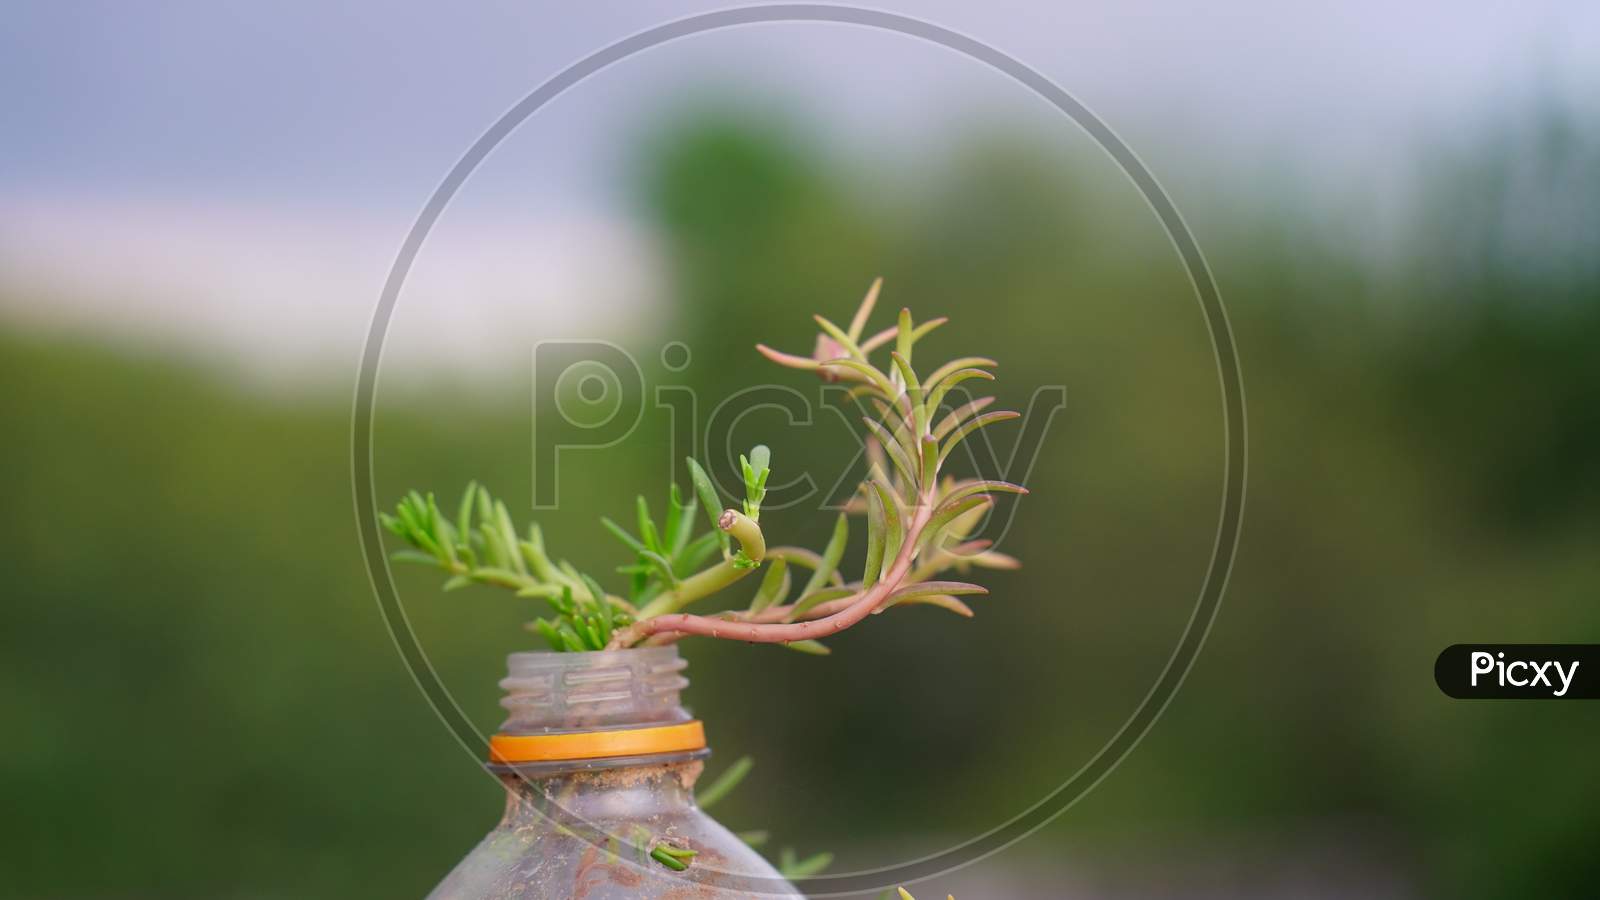 Green new budding flowering plant with blurred background.